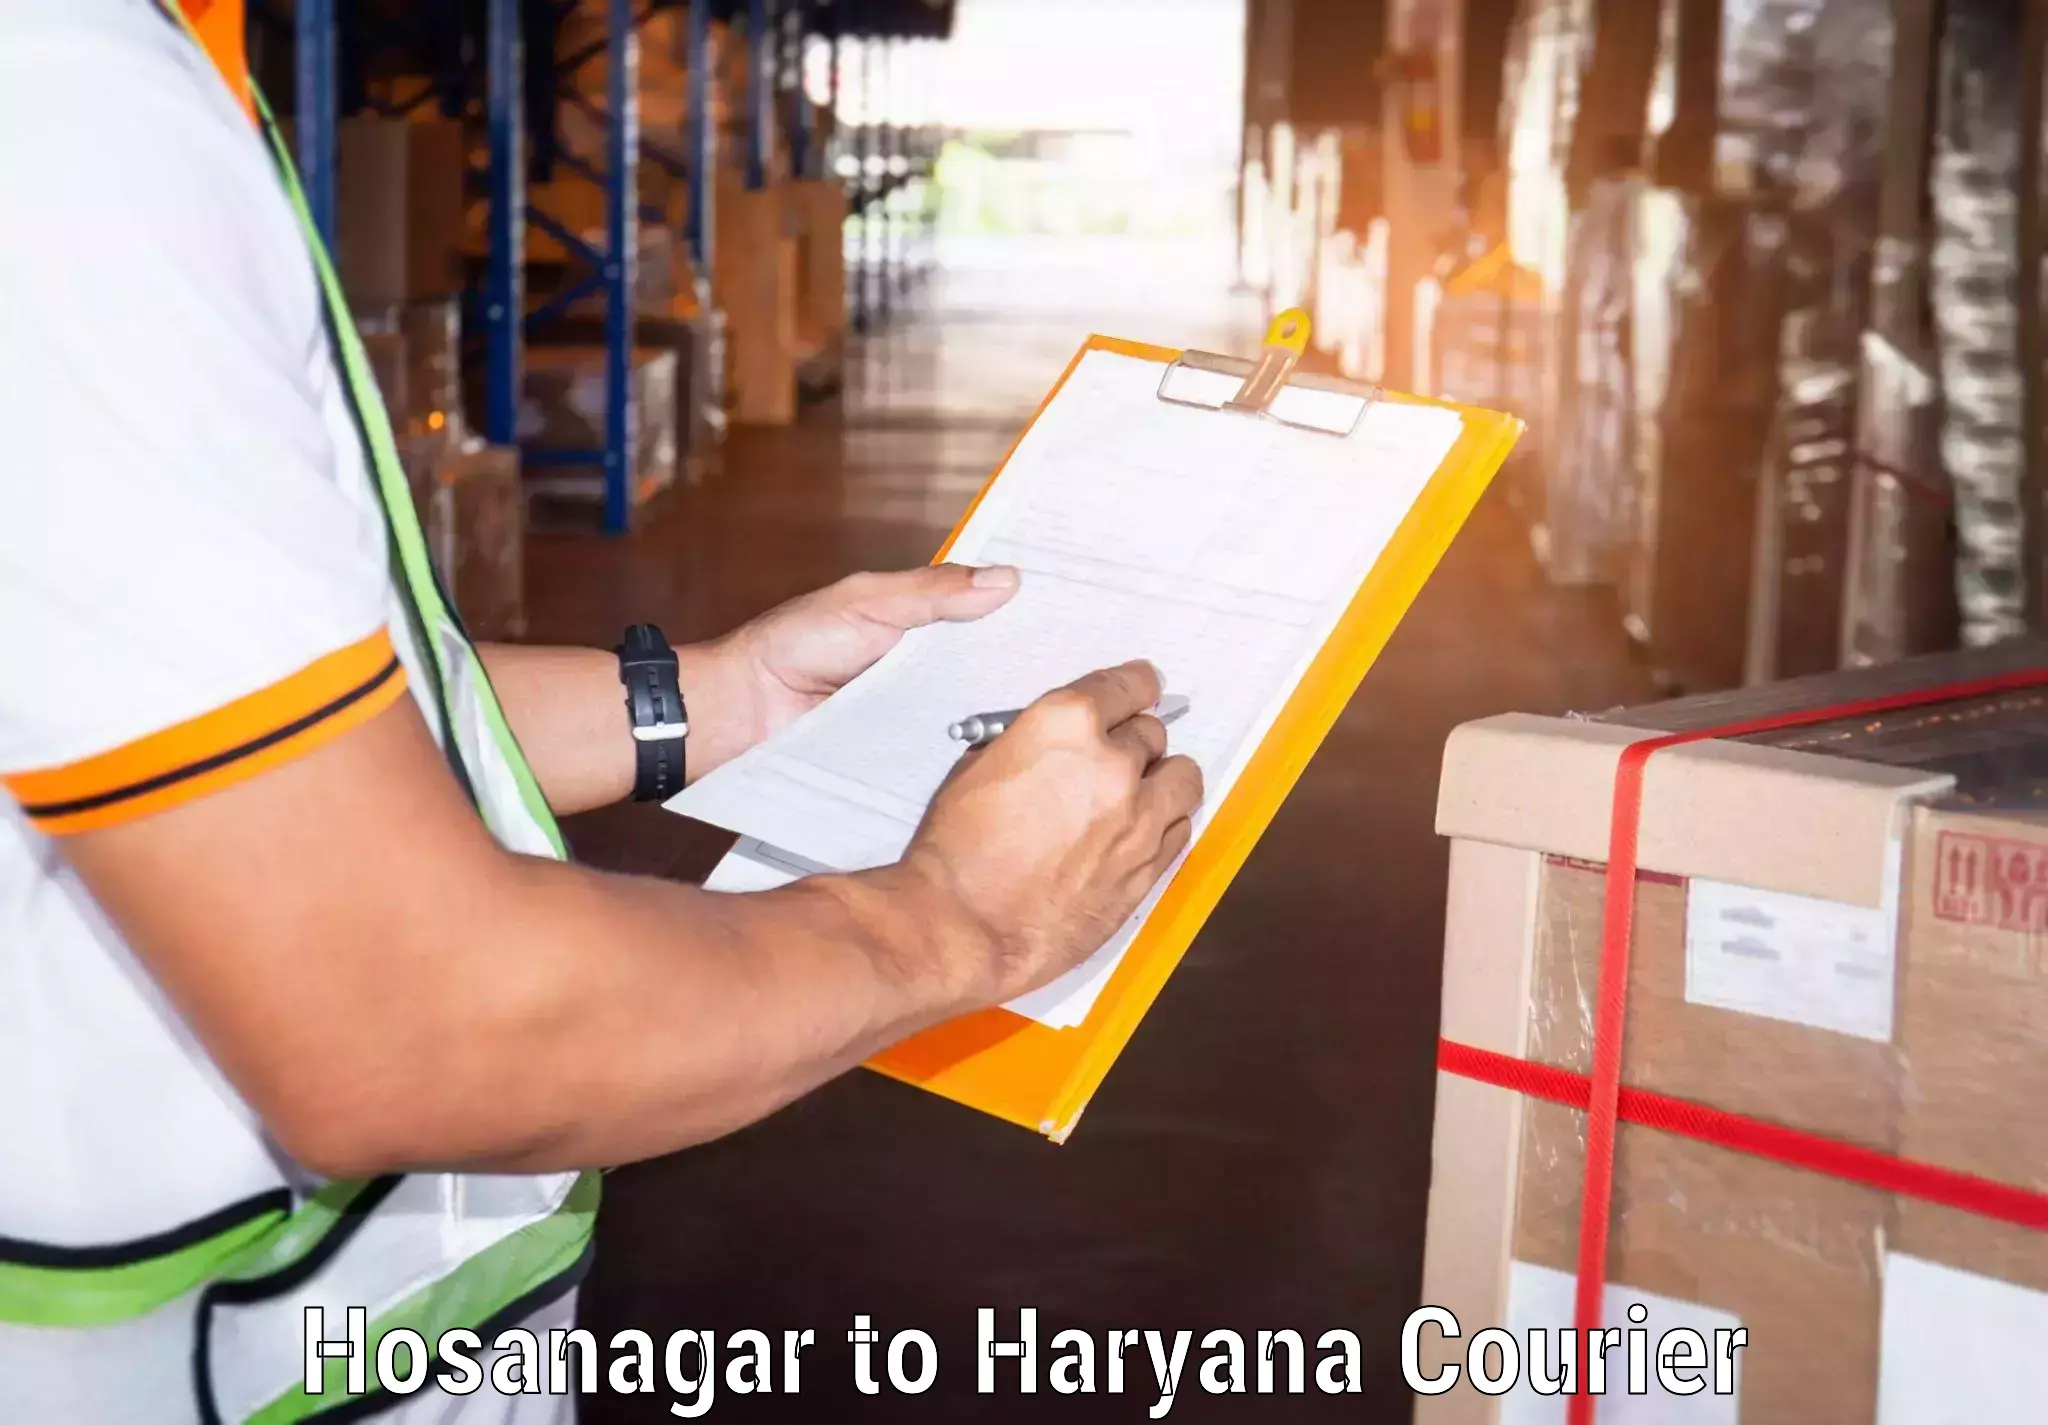 Courier service booking in Hosanagar to Fatehabad